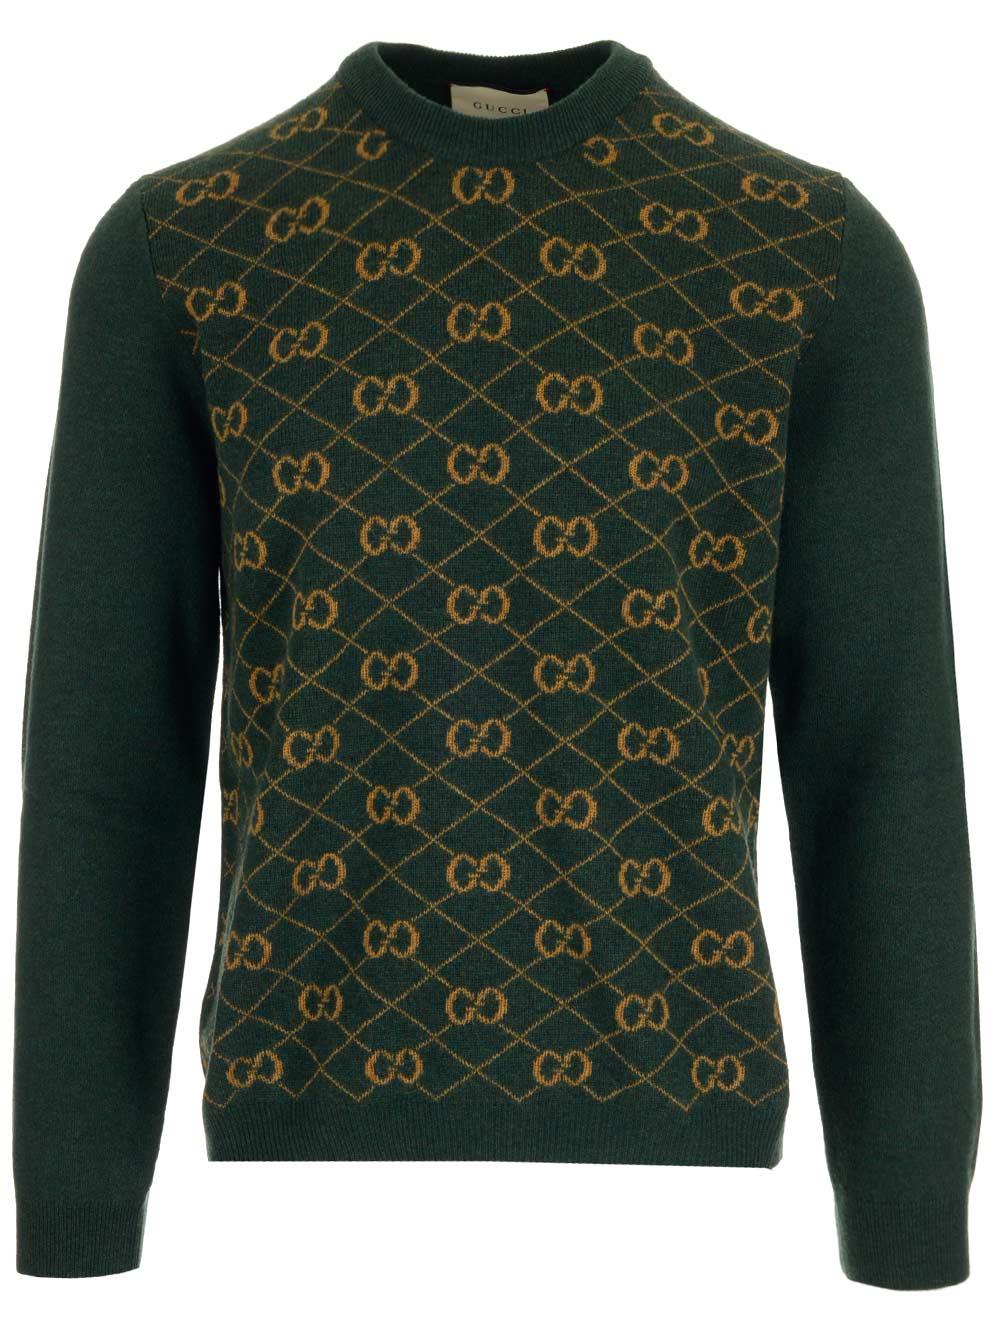 Gucci Wool GG Knitted Sweater in Green for Men - Lyst